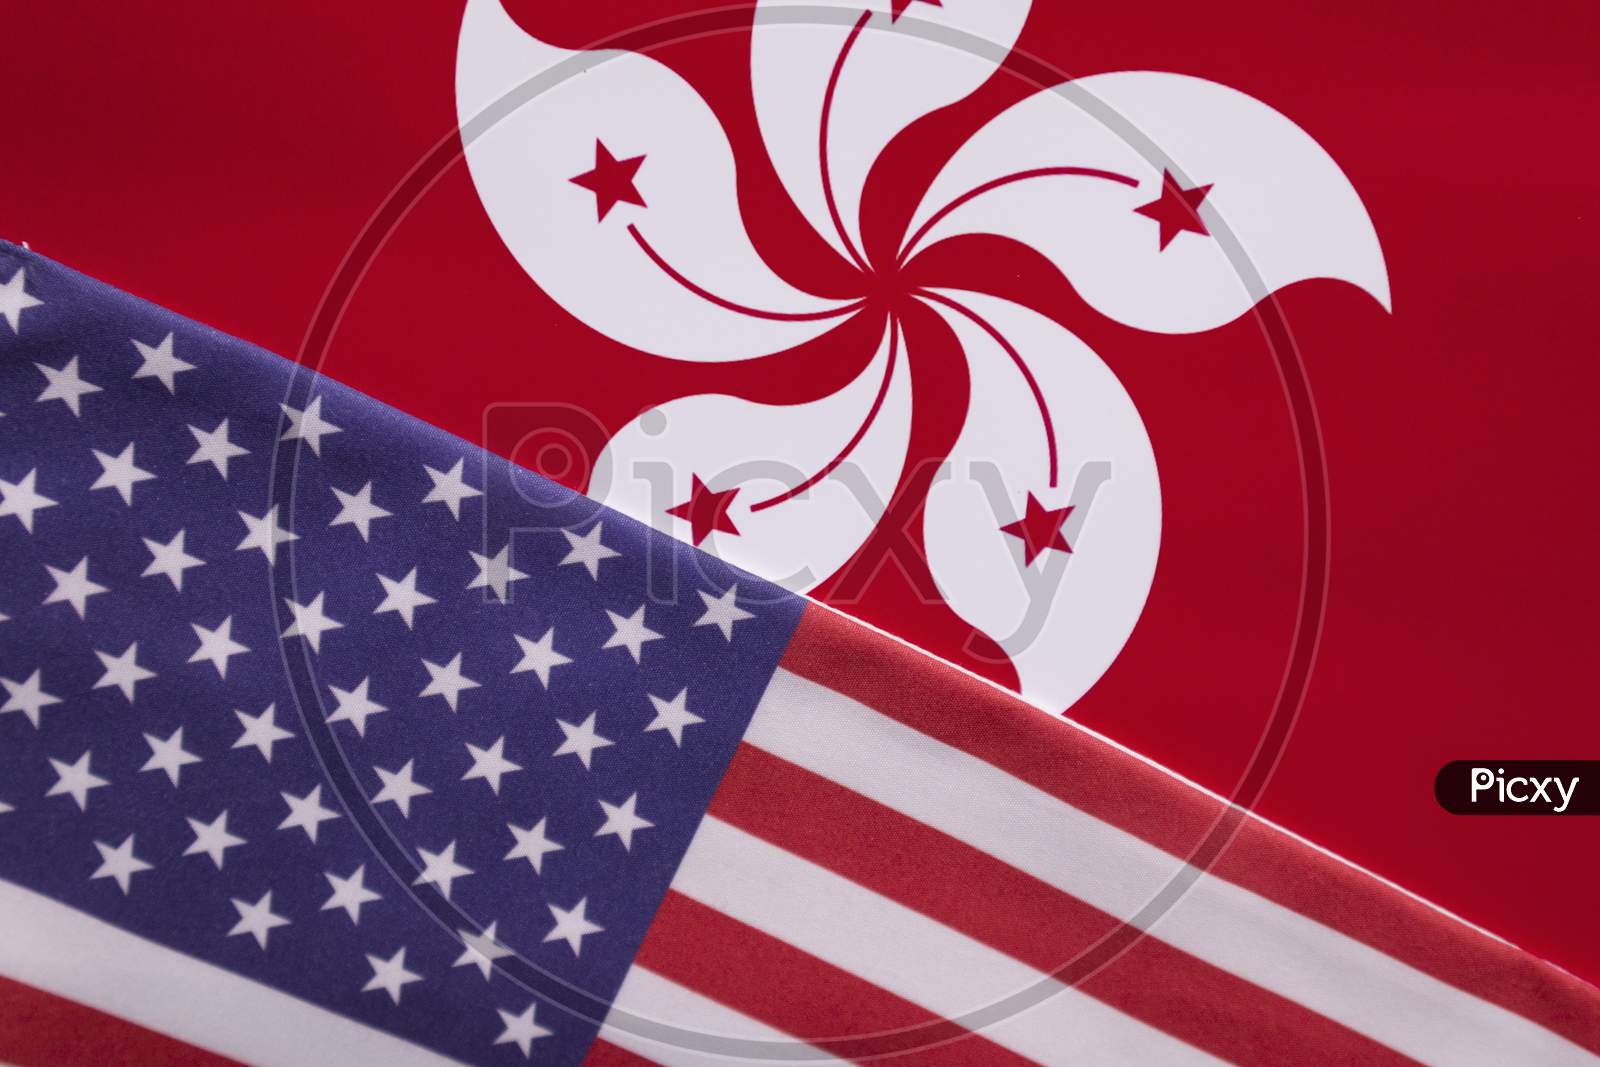 Concept Of Bilateral Relationship Between Usa And Hong Kong By Using The Flags.